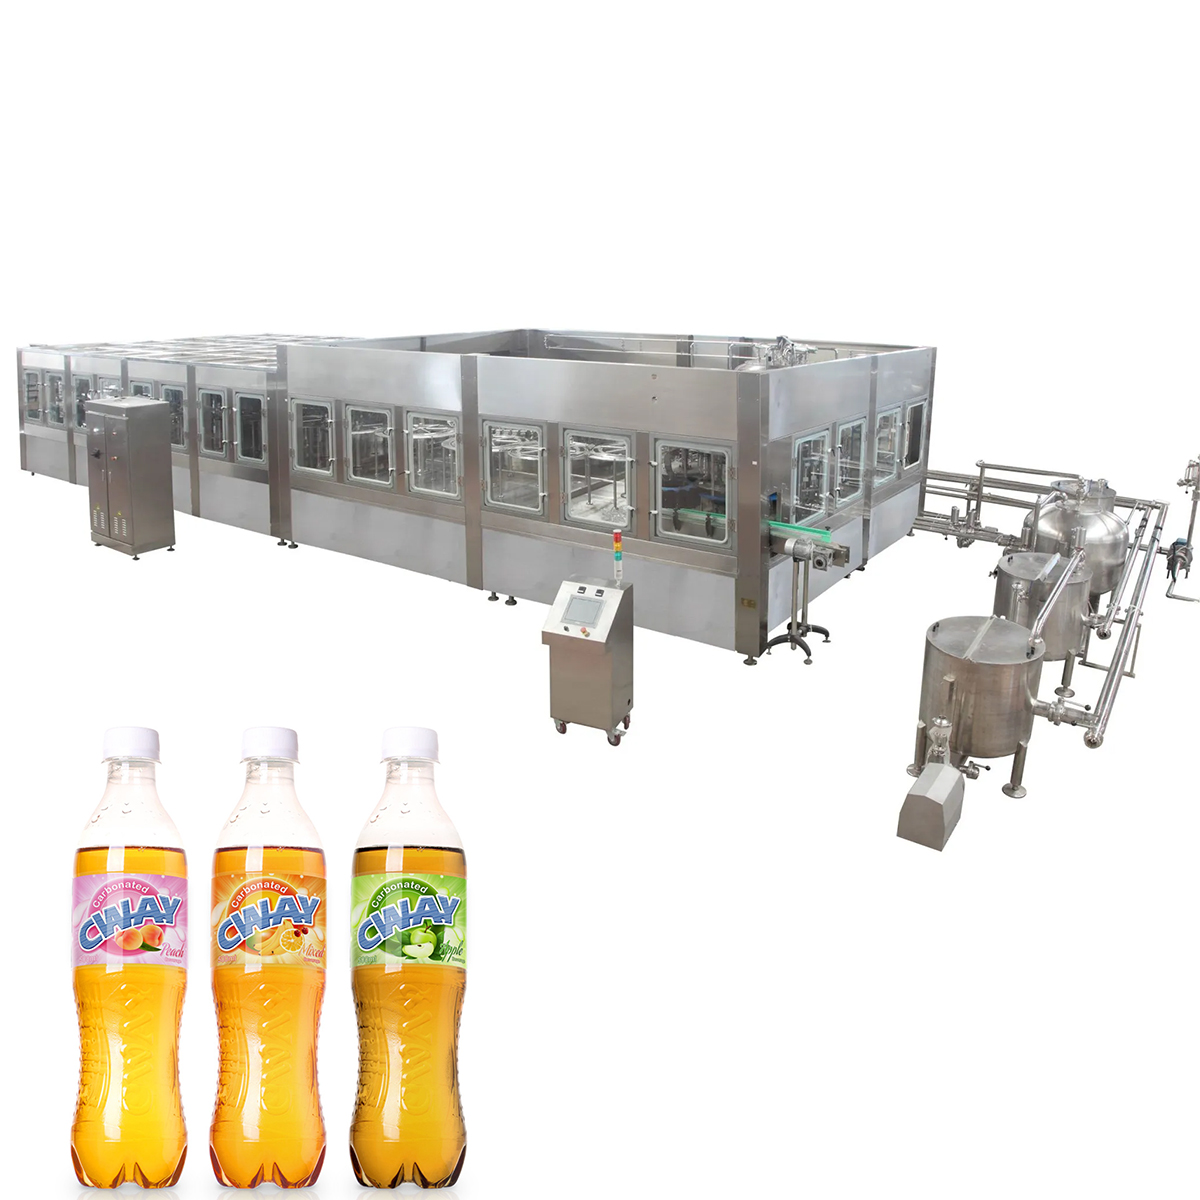 Your Trusted Manufacturer of Automatic Beverage Filling Machines